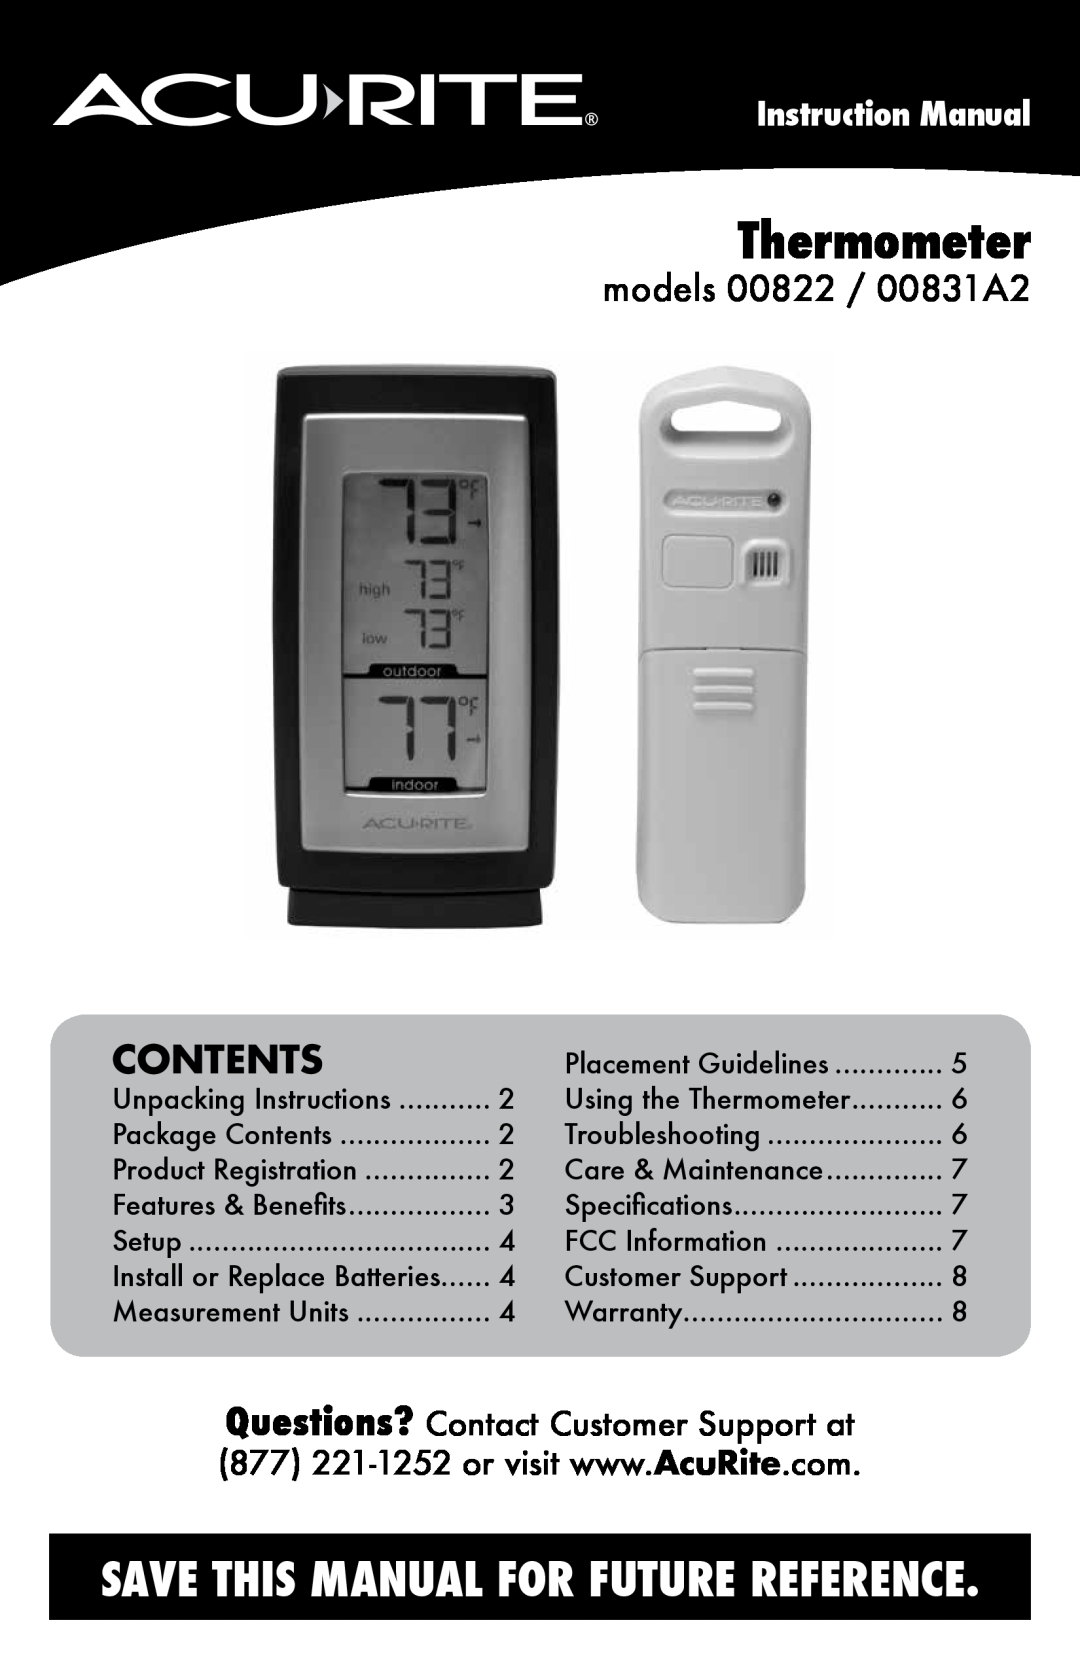 Acu-Rite instruction manual Contents, models 00822 / 00831A2, Instruction Manual, Thermometer 